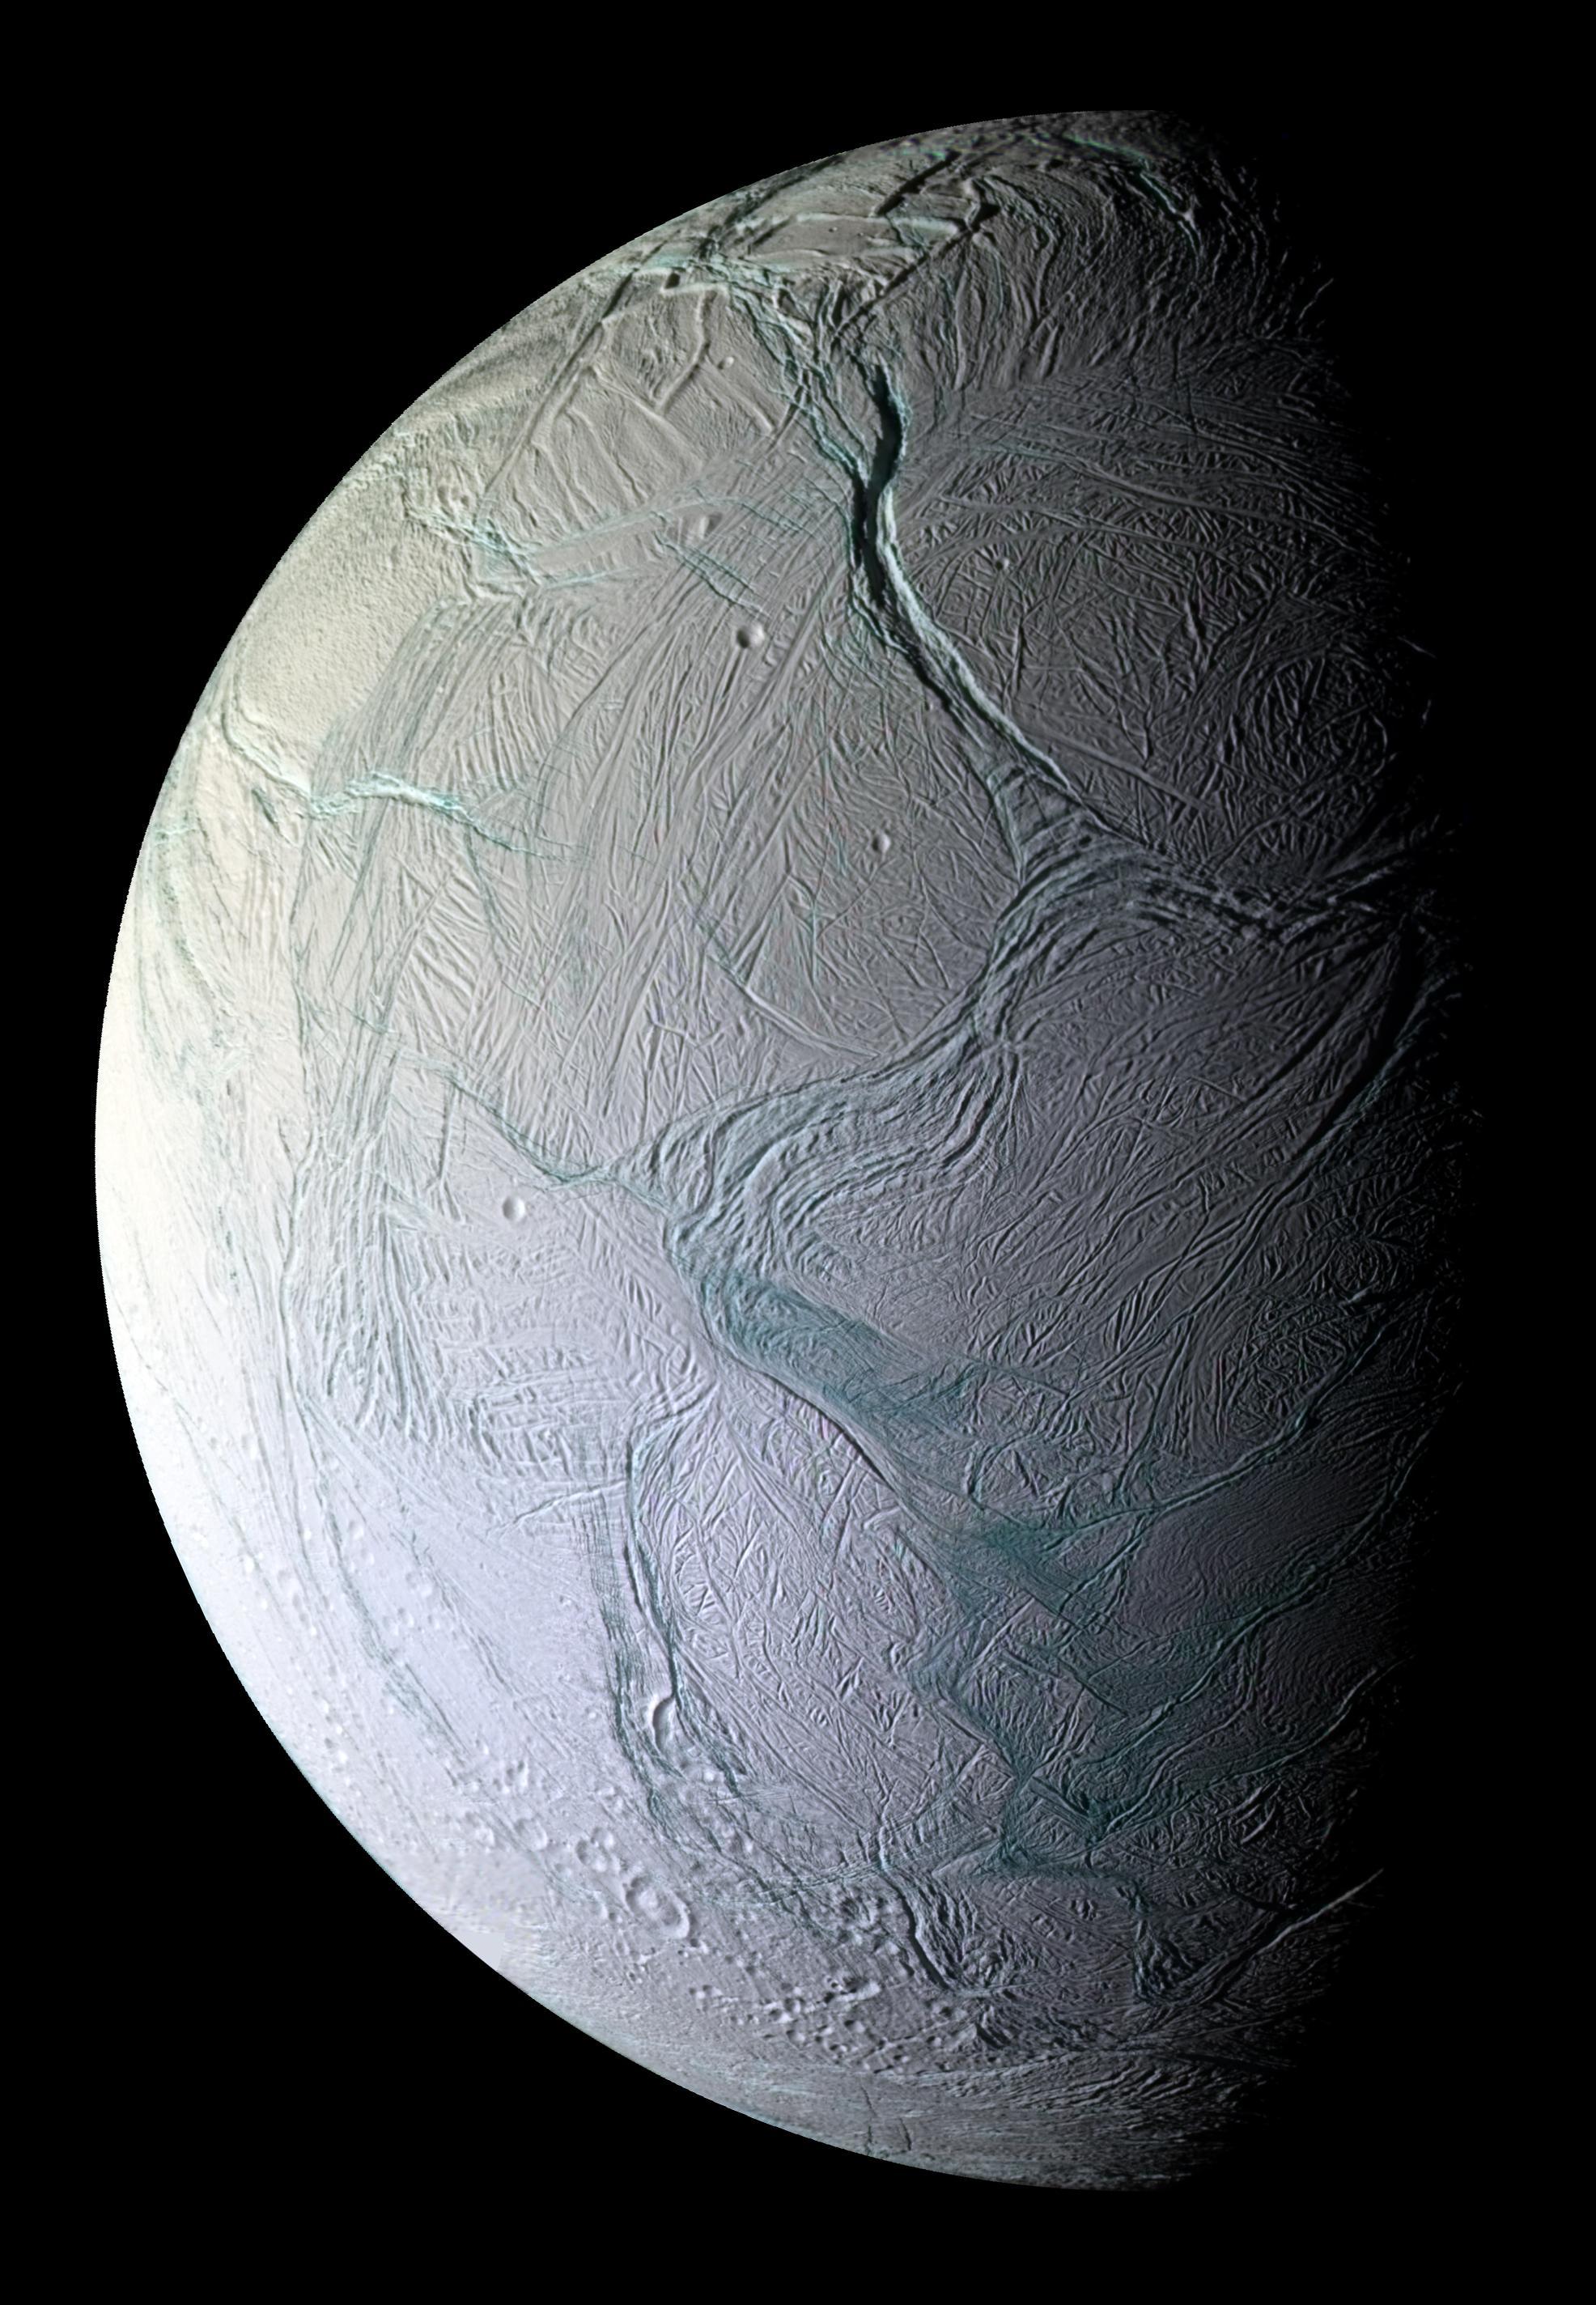 The icy white surface of a moon in space is completely covered in wrinkles, folds, and fractures, some appearing bluish in color.